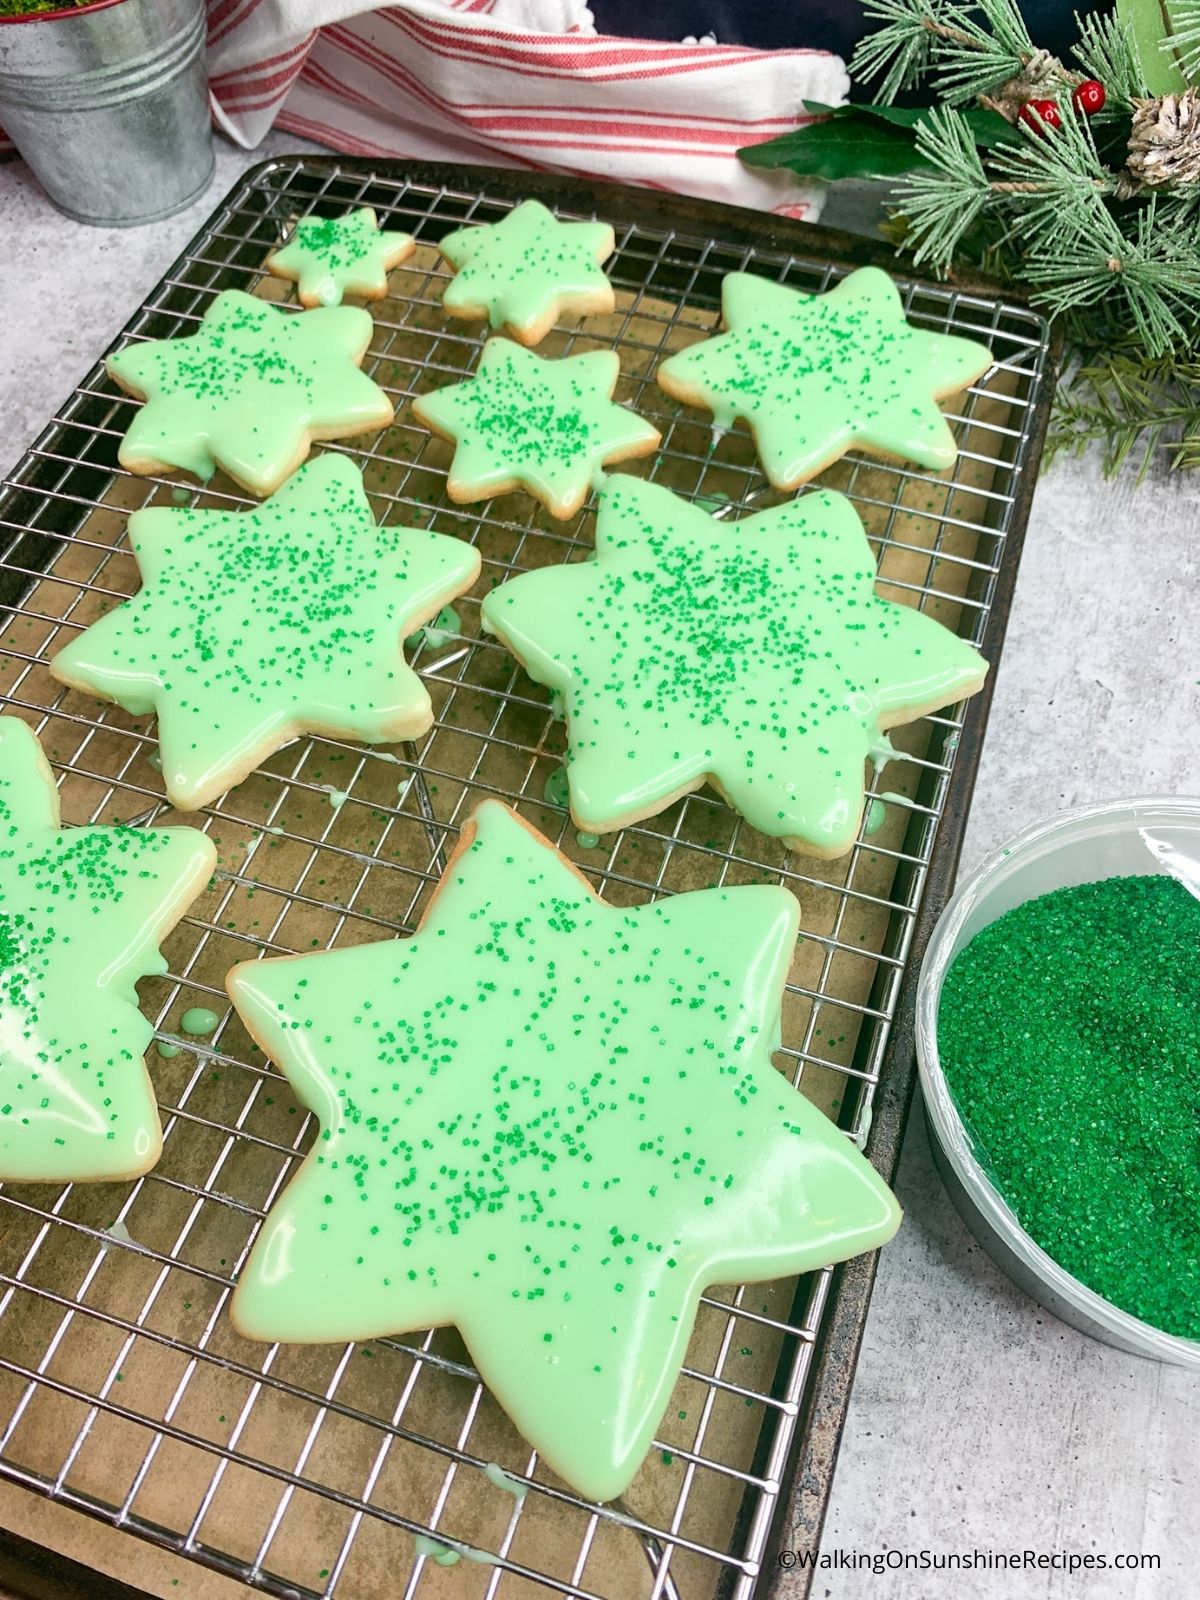 star shaped cookies dipped in green frosting.